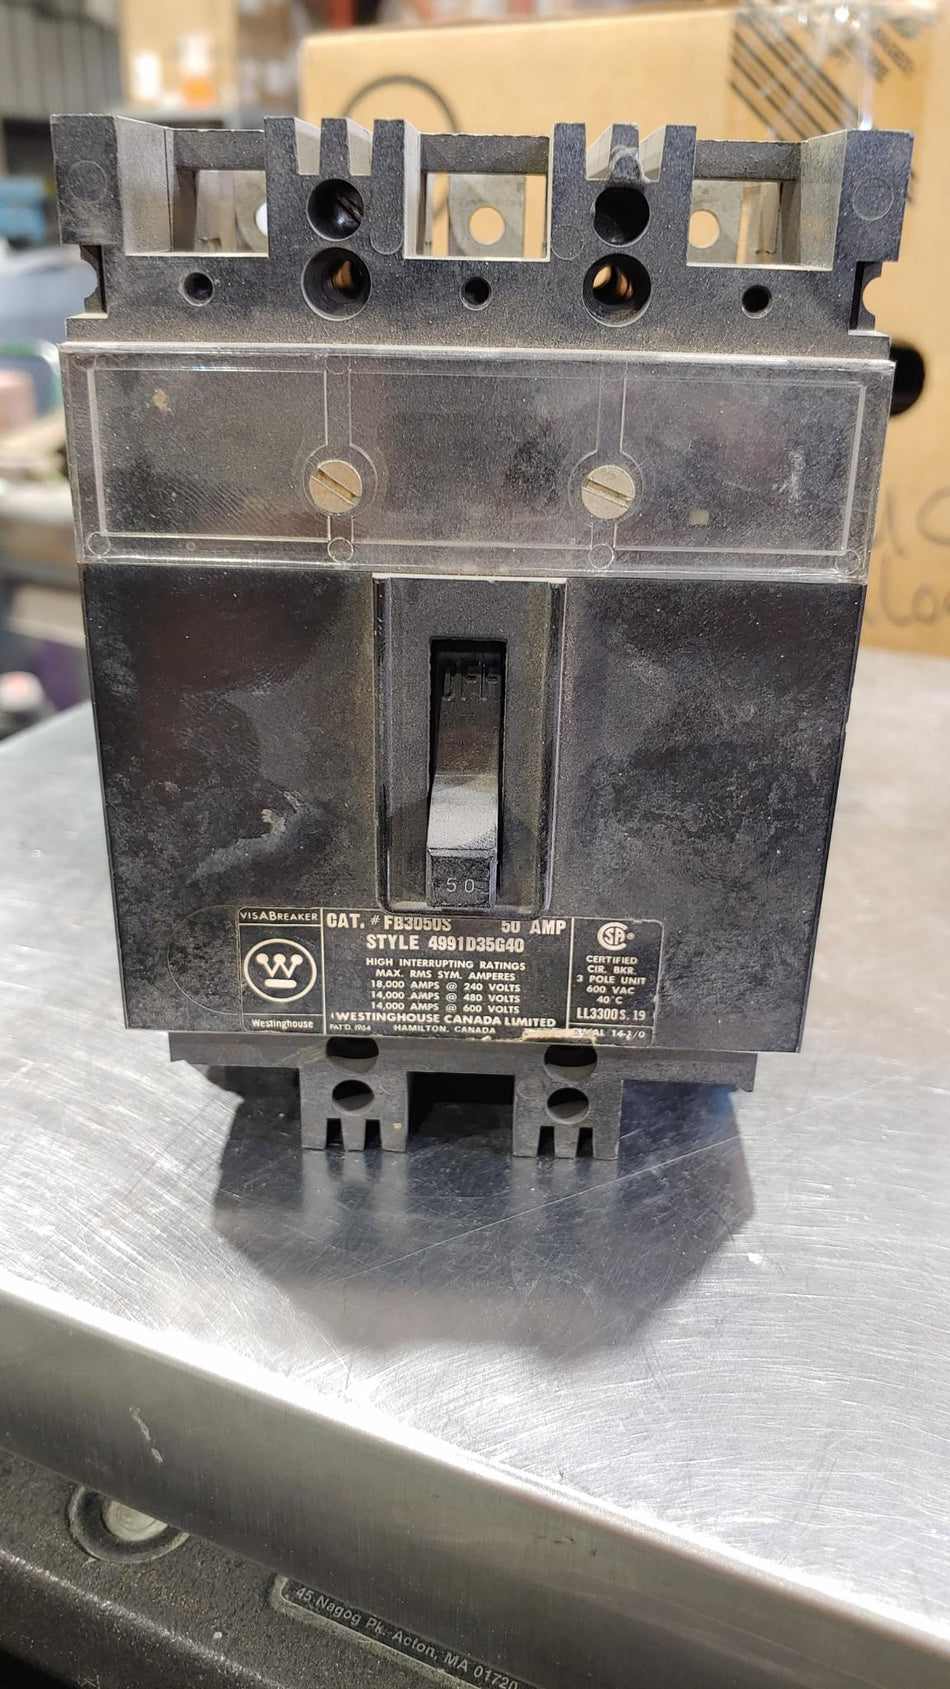 Westinghouse FB3050S 50A Breaker (used)